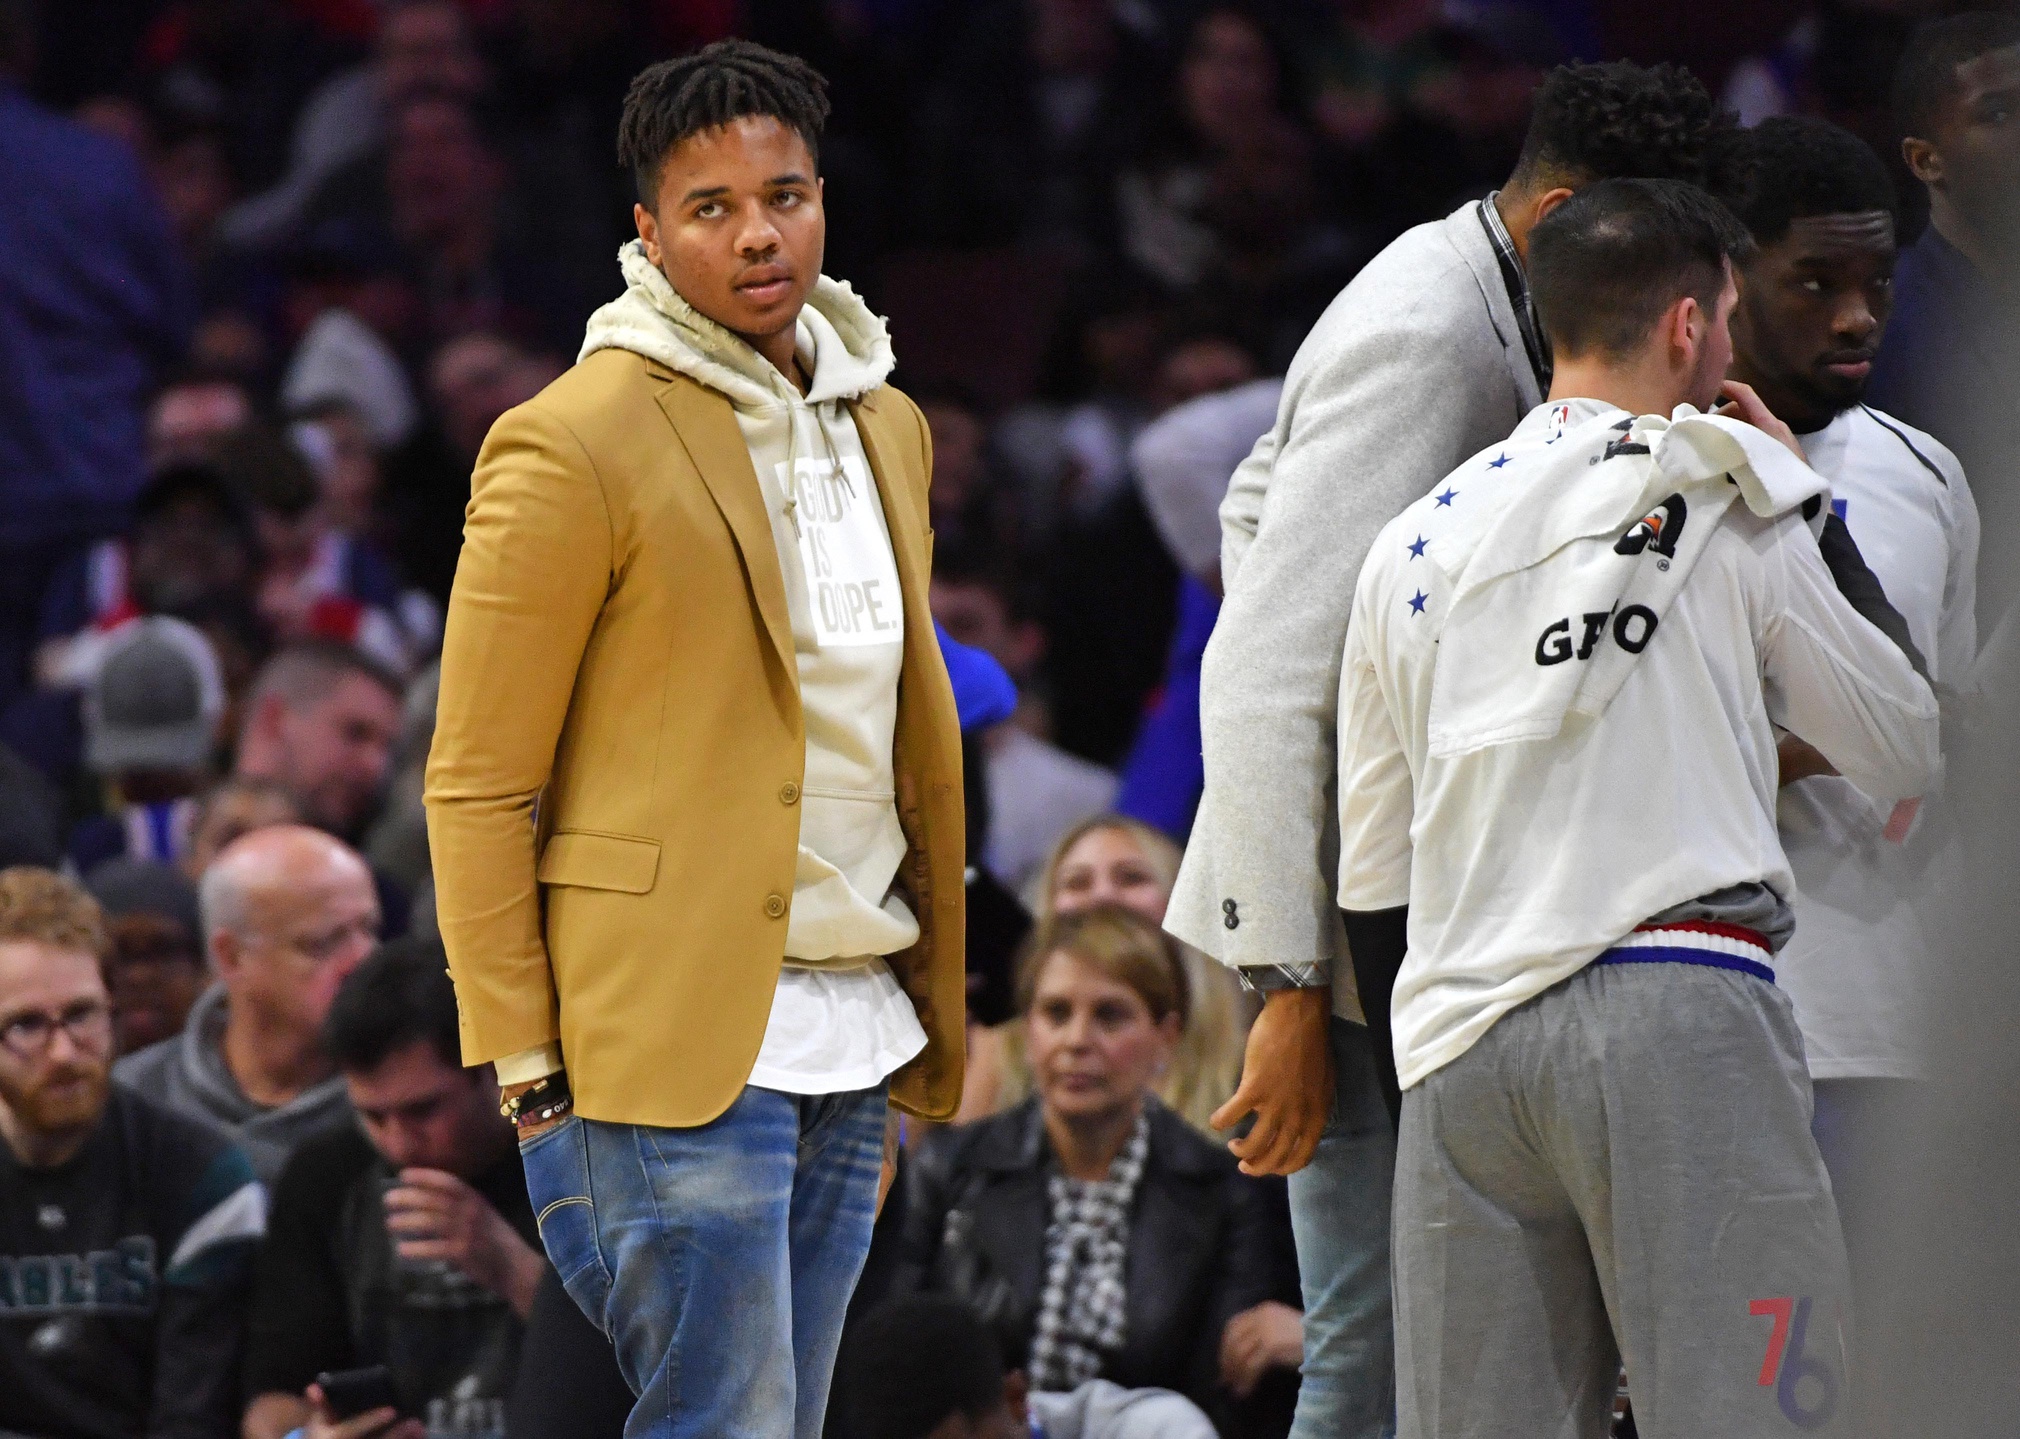 Markelle Fultz Unlikely to Play This Season